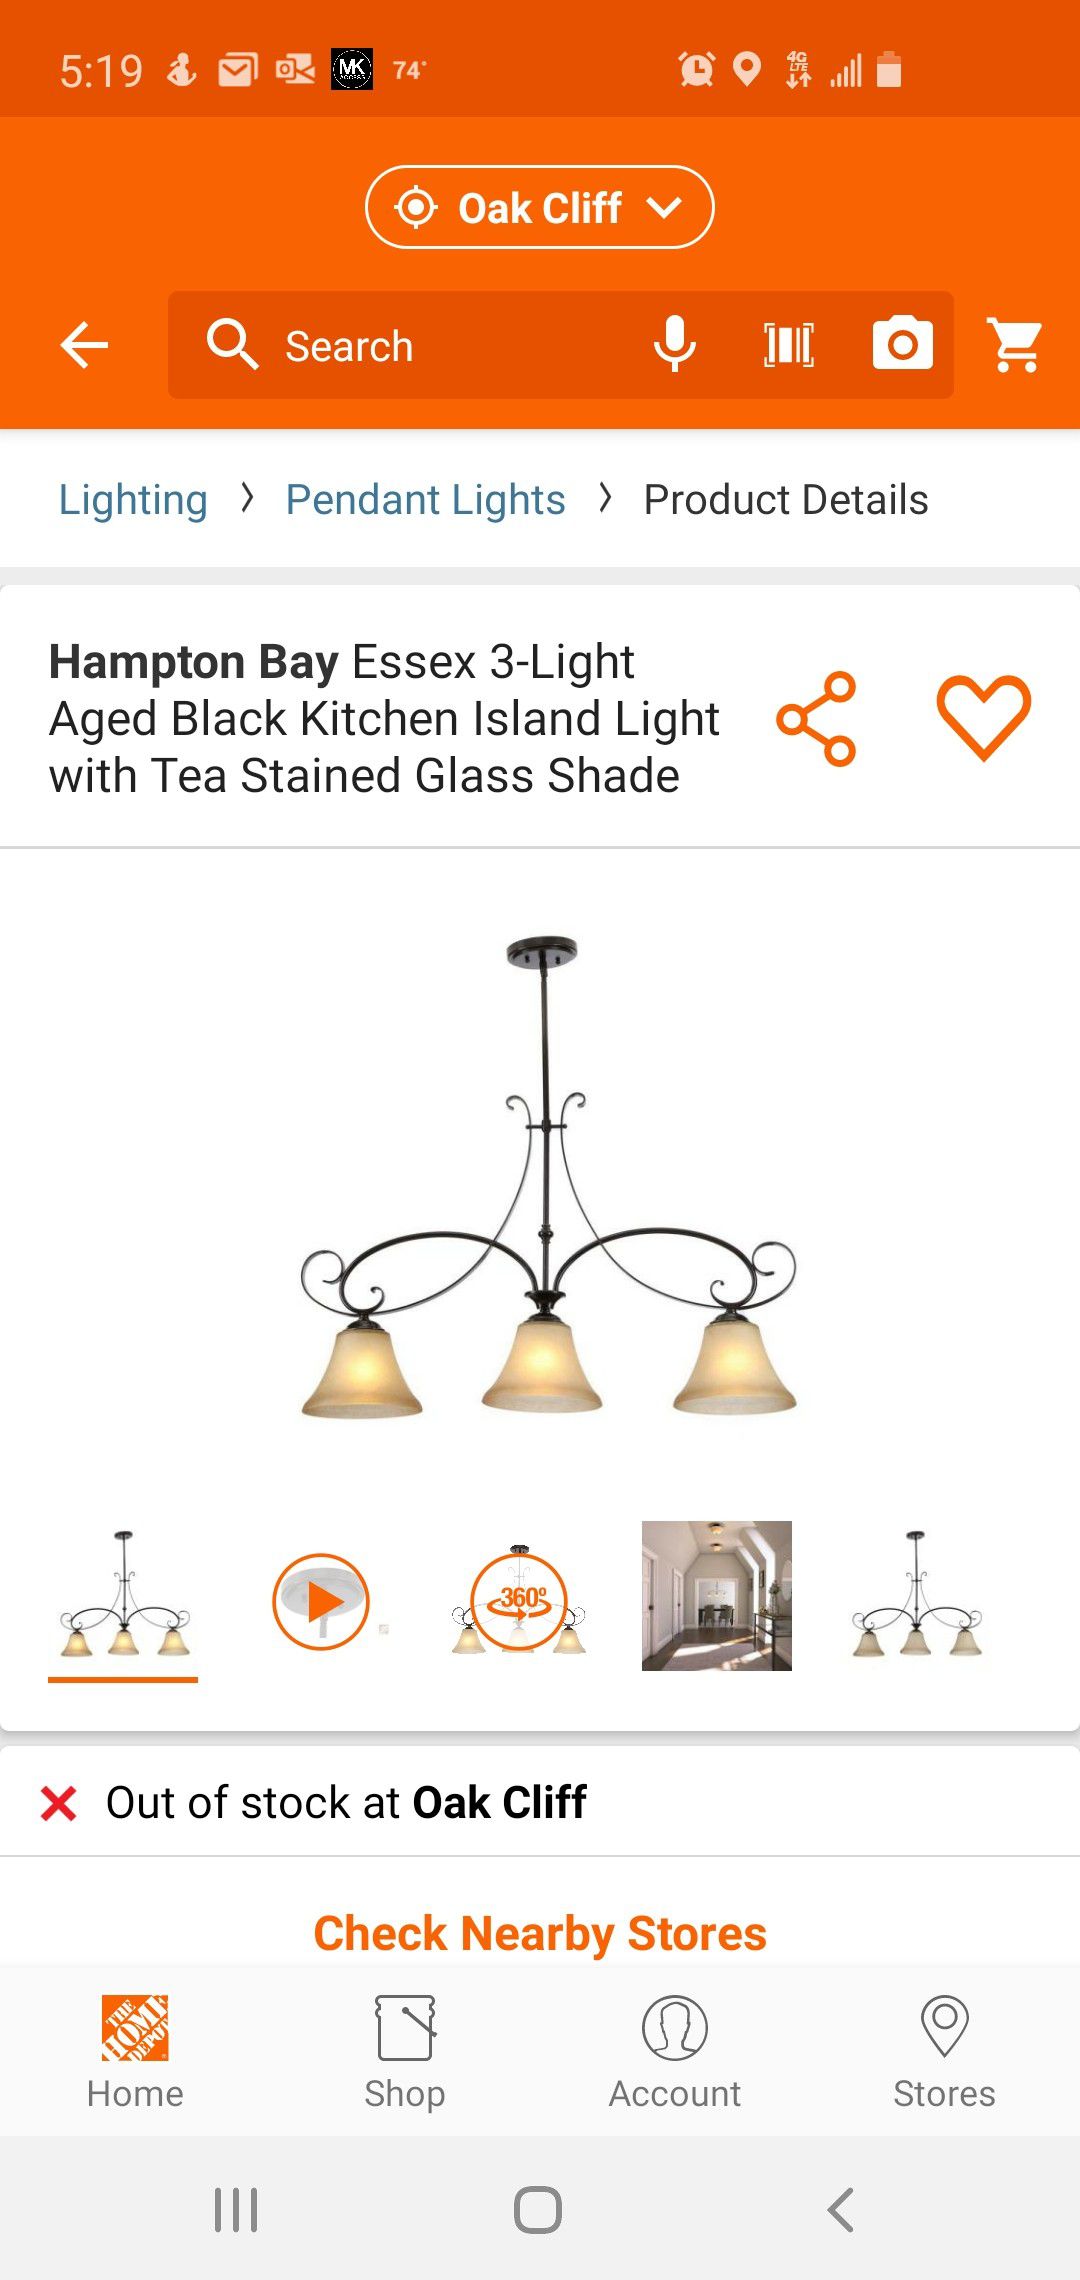 Hampton Bay Essex 3-Light Aged Black Kitchen Island Light with Tea Stained Glass Shade